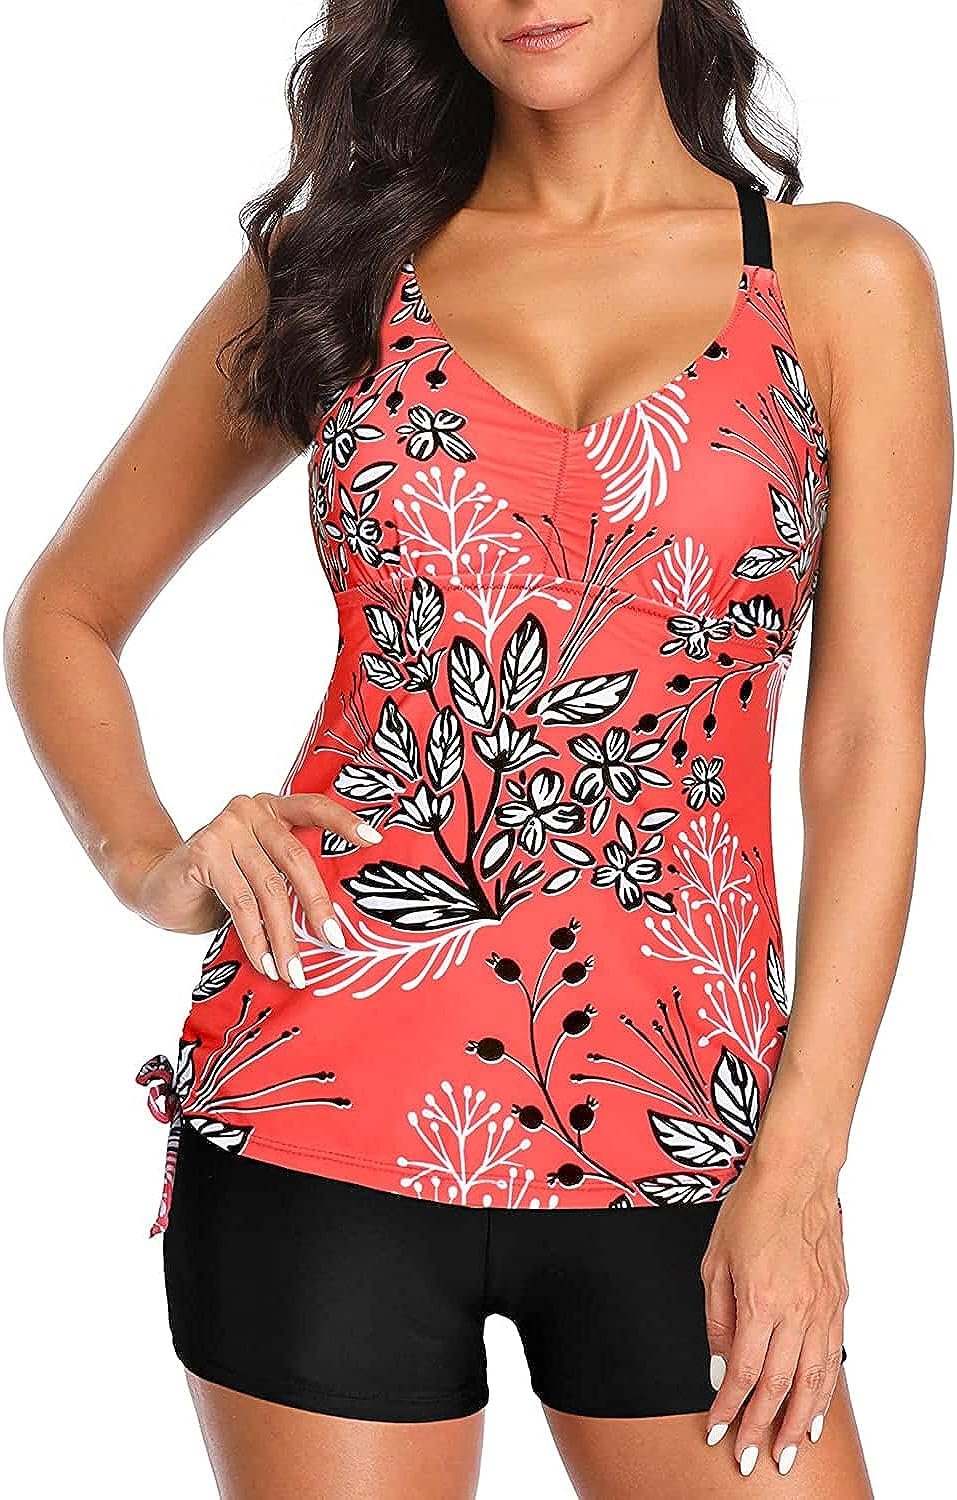 Two Piece Tankini Swimsuit Review